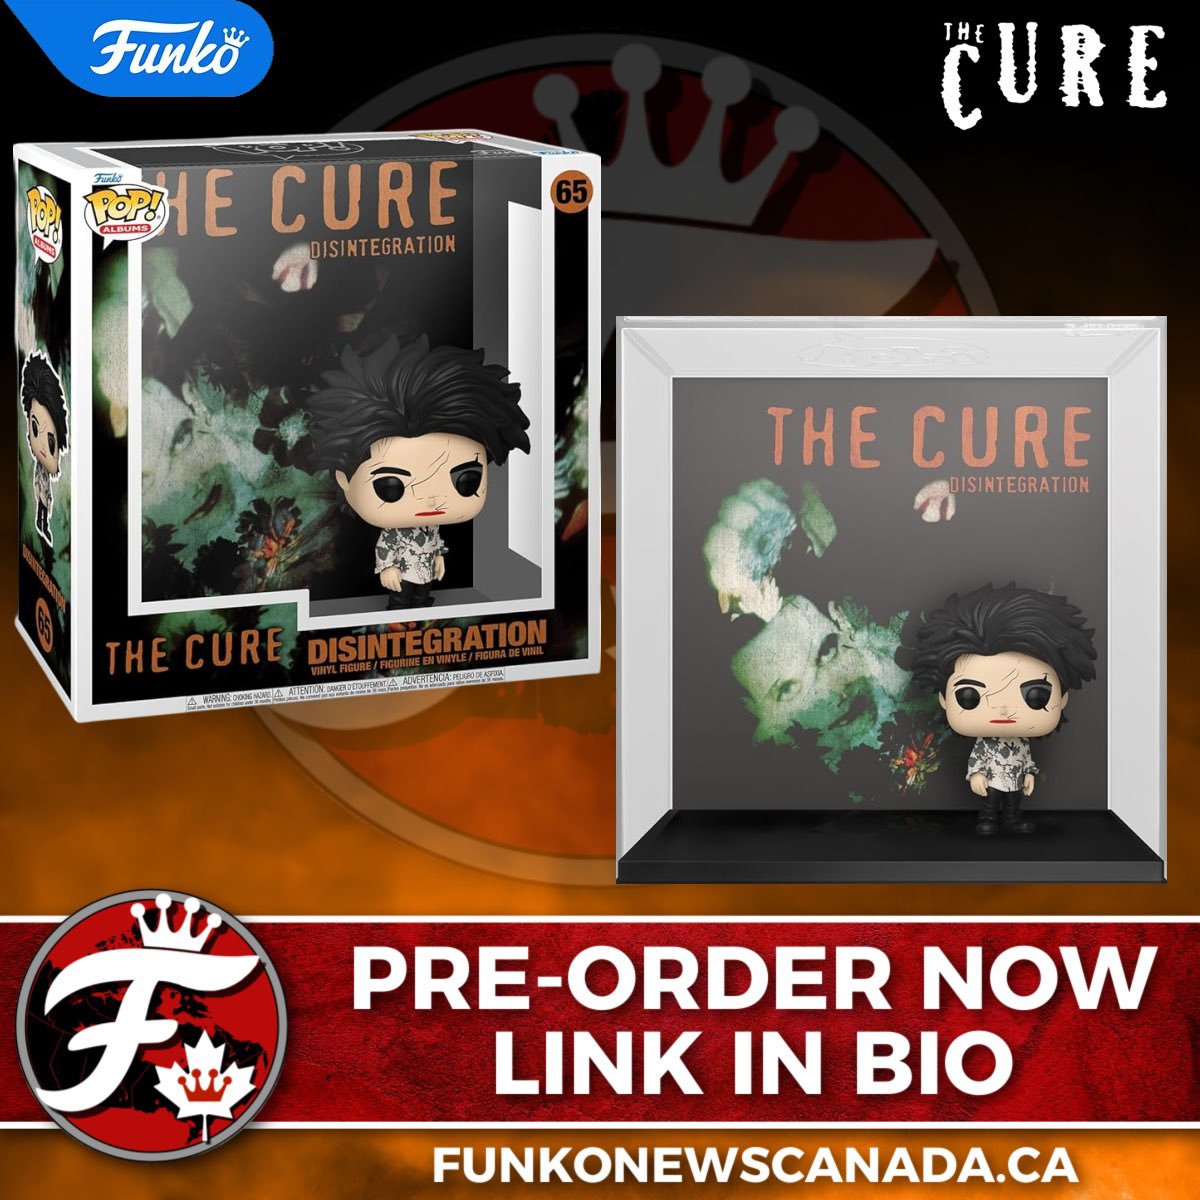 Coming Soon to Your Local Funko Retailer Funko Pop! Albums: The Cure - Disintegration Amazon CA: amzn.to/43RYDcc Amazon US: amzn.to/3xrS83D #nerdlife #vinylfigures #funkocommunity #funkocollector #toycommunity #collectibles #geeklife #popculture #funkofanatic…